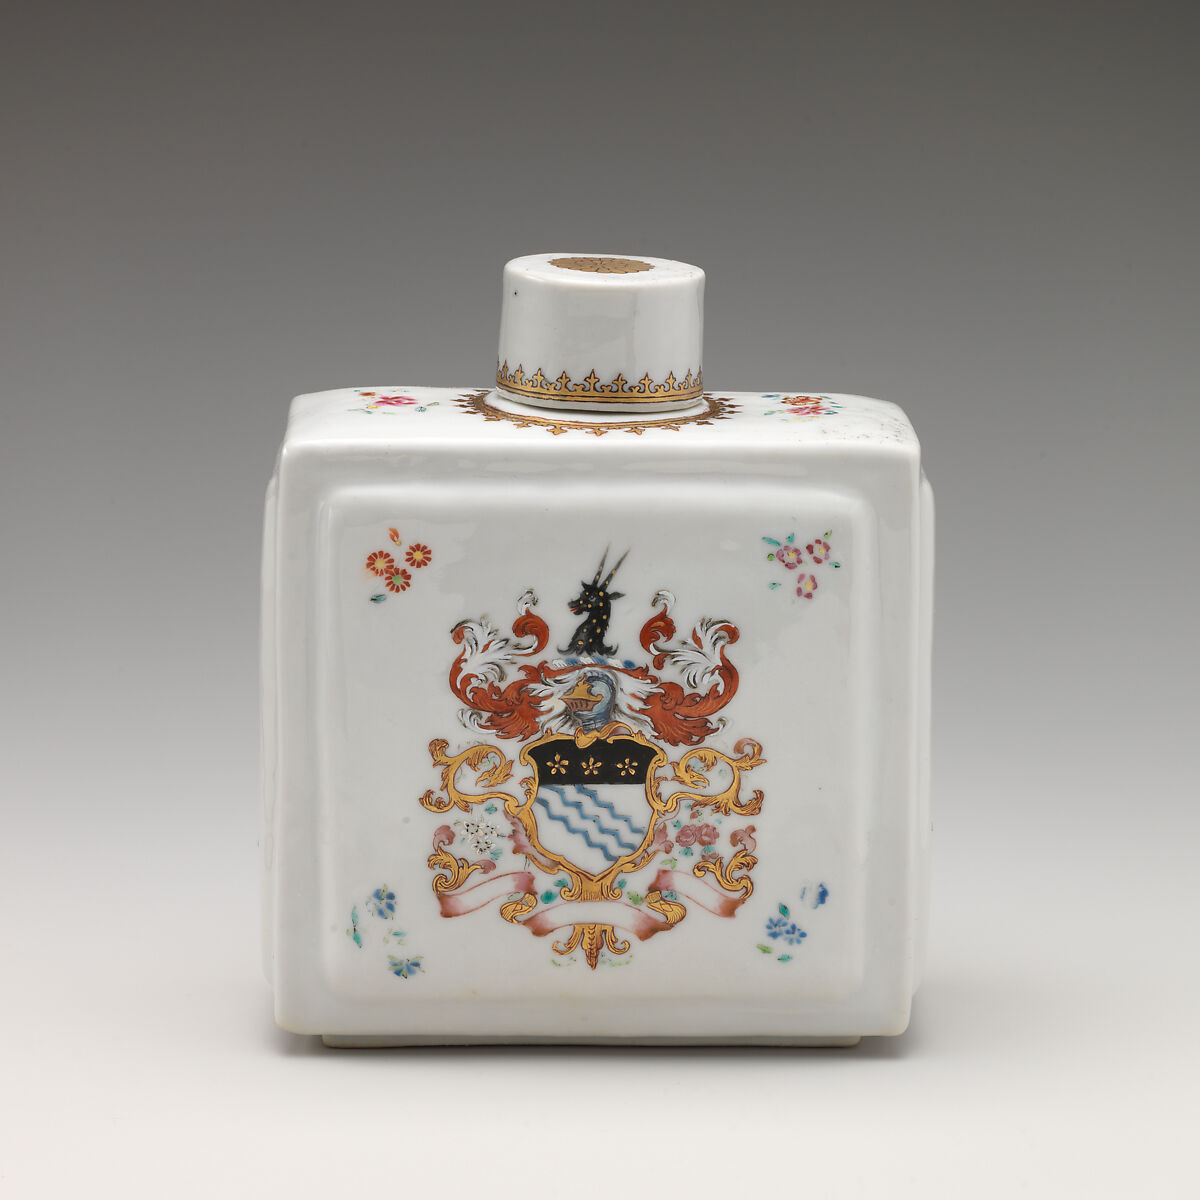 Tea caddy with cover with armorial decoration (part of a service), Hard-paste porcelain with enamel decoration and gilding, Chinese, for British market 